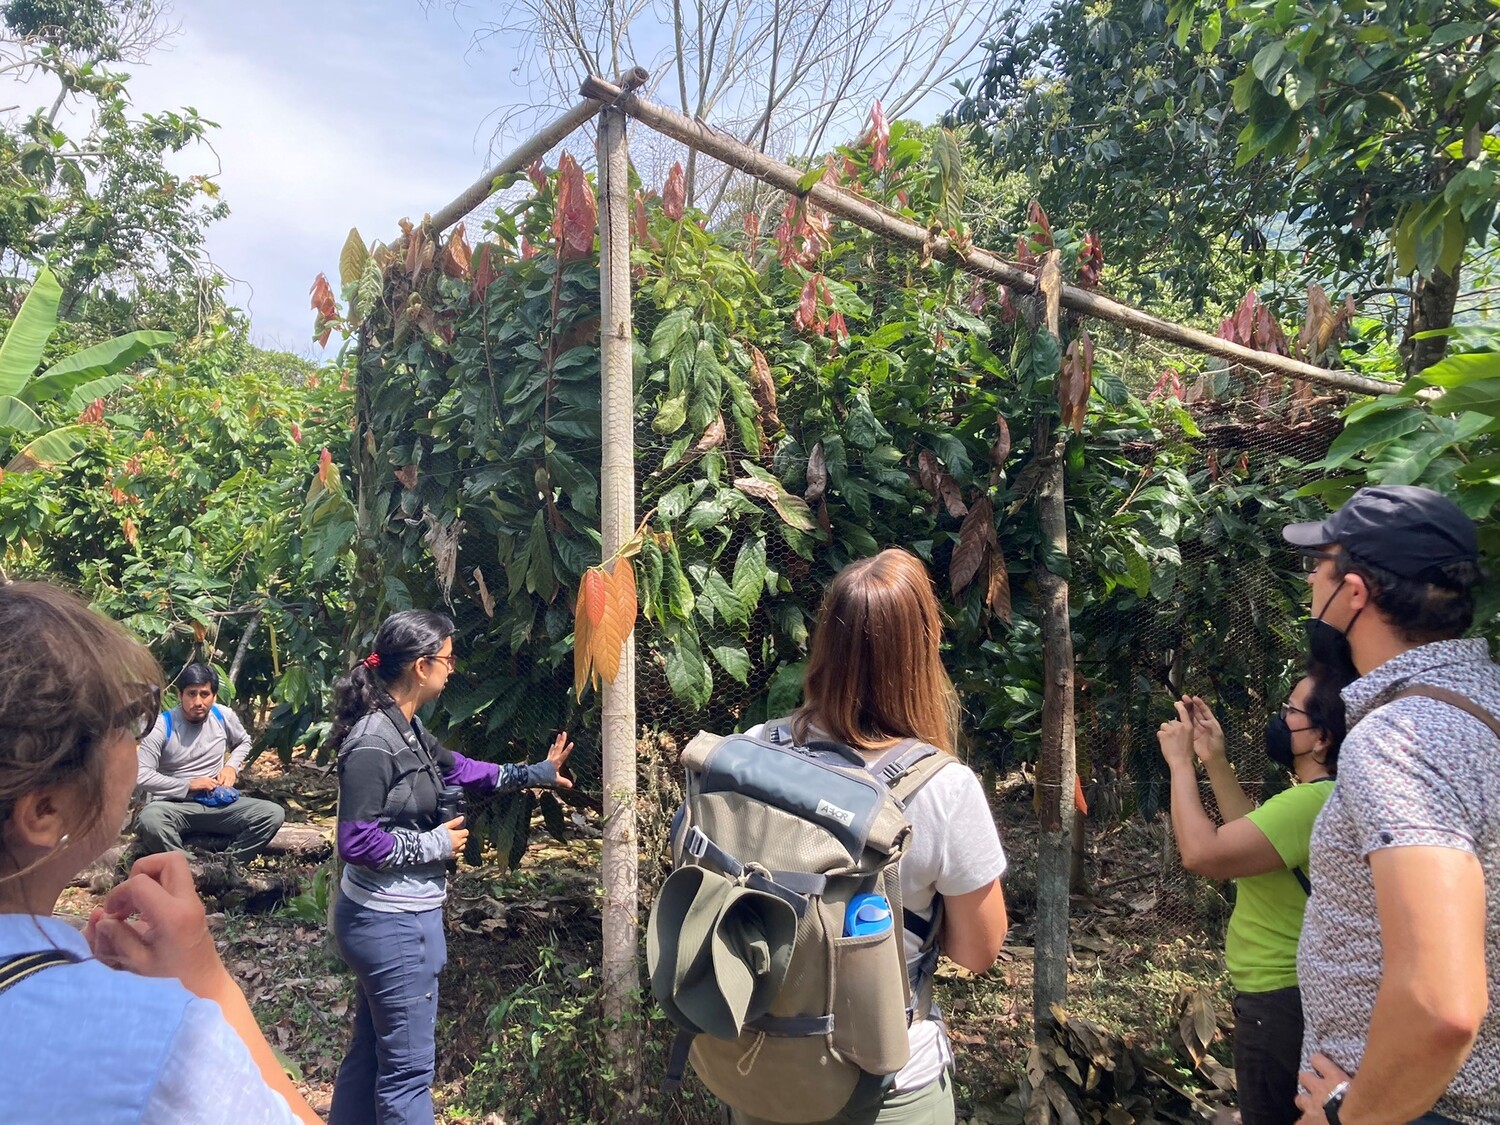 The scientists share their findings with local communities in Peru in front of an enclosed area of cacao plants. The area is fenced off to prevent birds and bats from reaching the cacao plants.